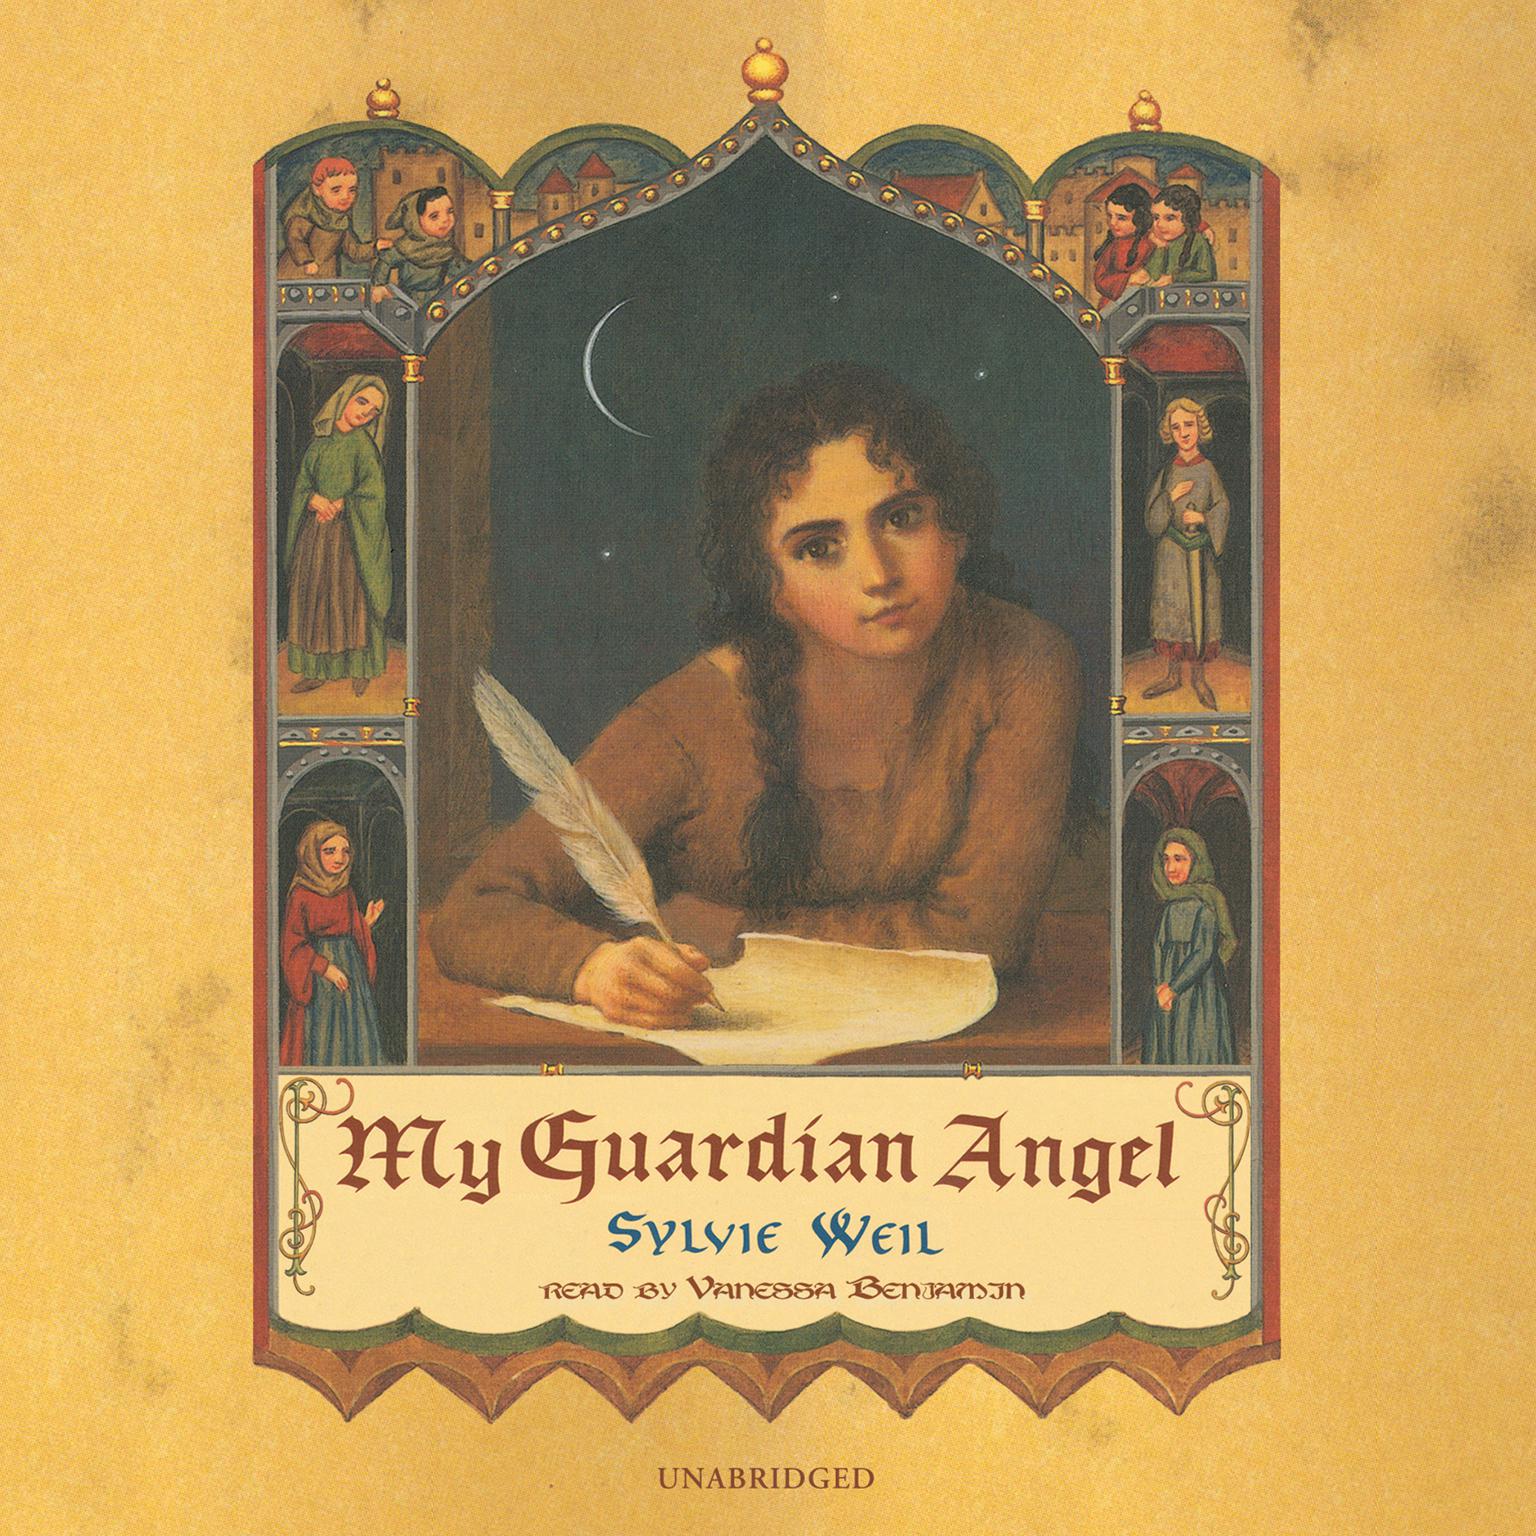 My Guardian Angel Audiobook, by Sylvie Weil